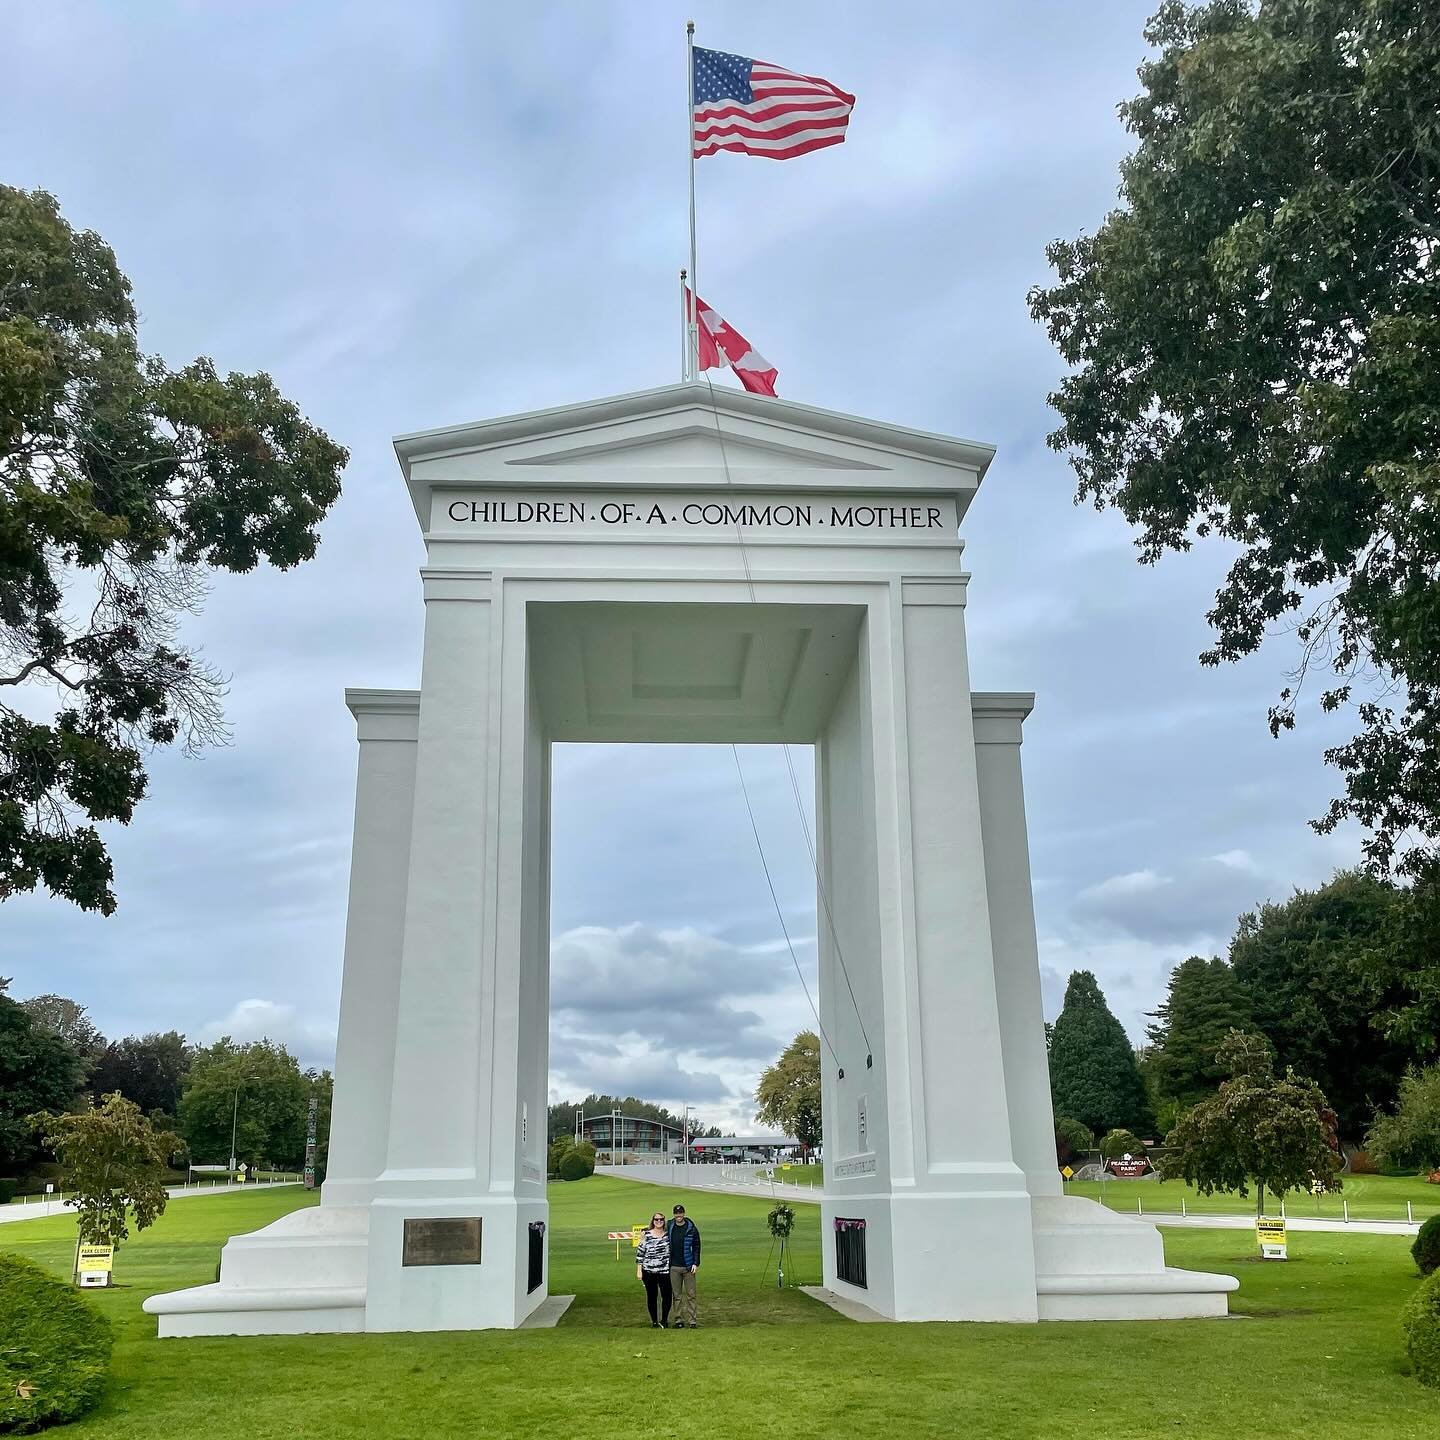 The International Peace Arch is a 67-foot dramatic white arch that rises from the green lawns and flowering gardens on the U.S.-Canada border at Blaine. It is the iconic feature of this Washington Historical State Park, which is devoted to peace and 